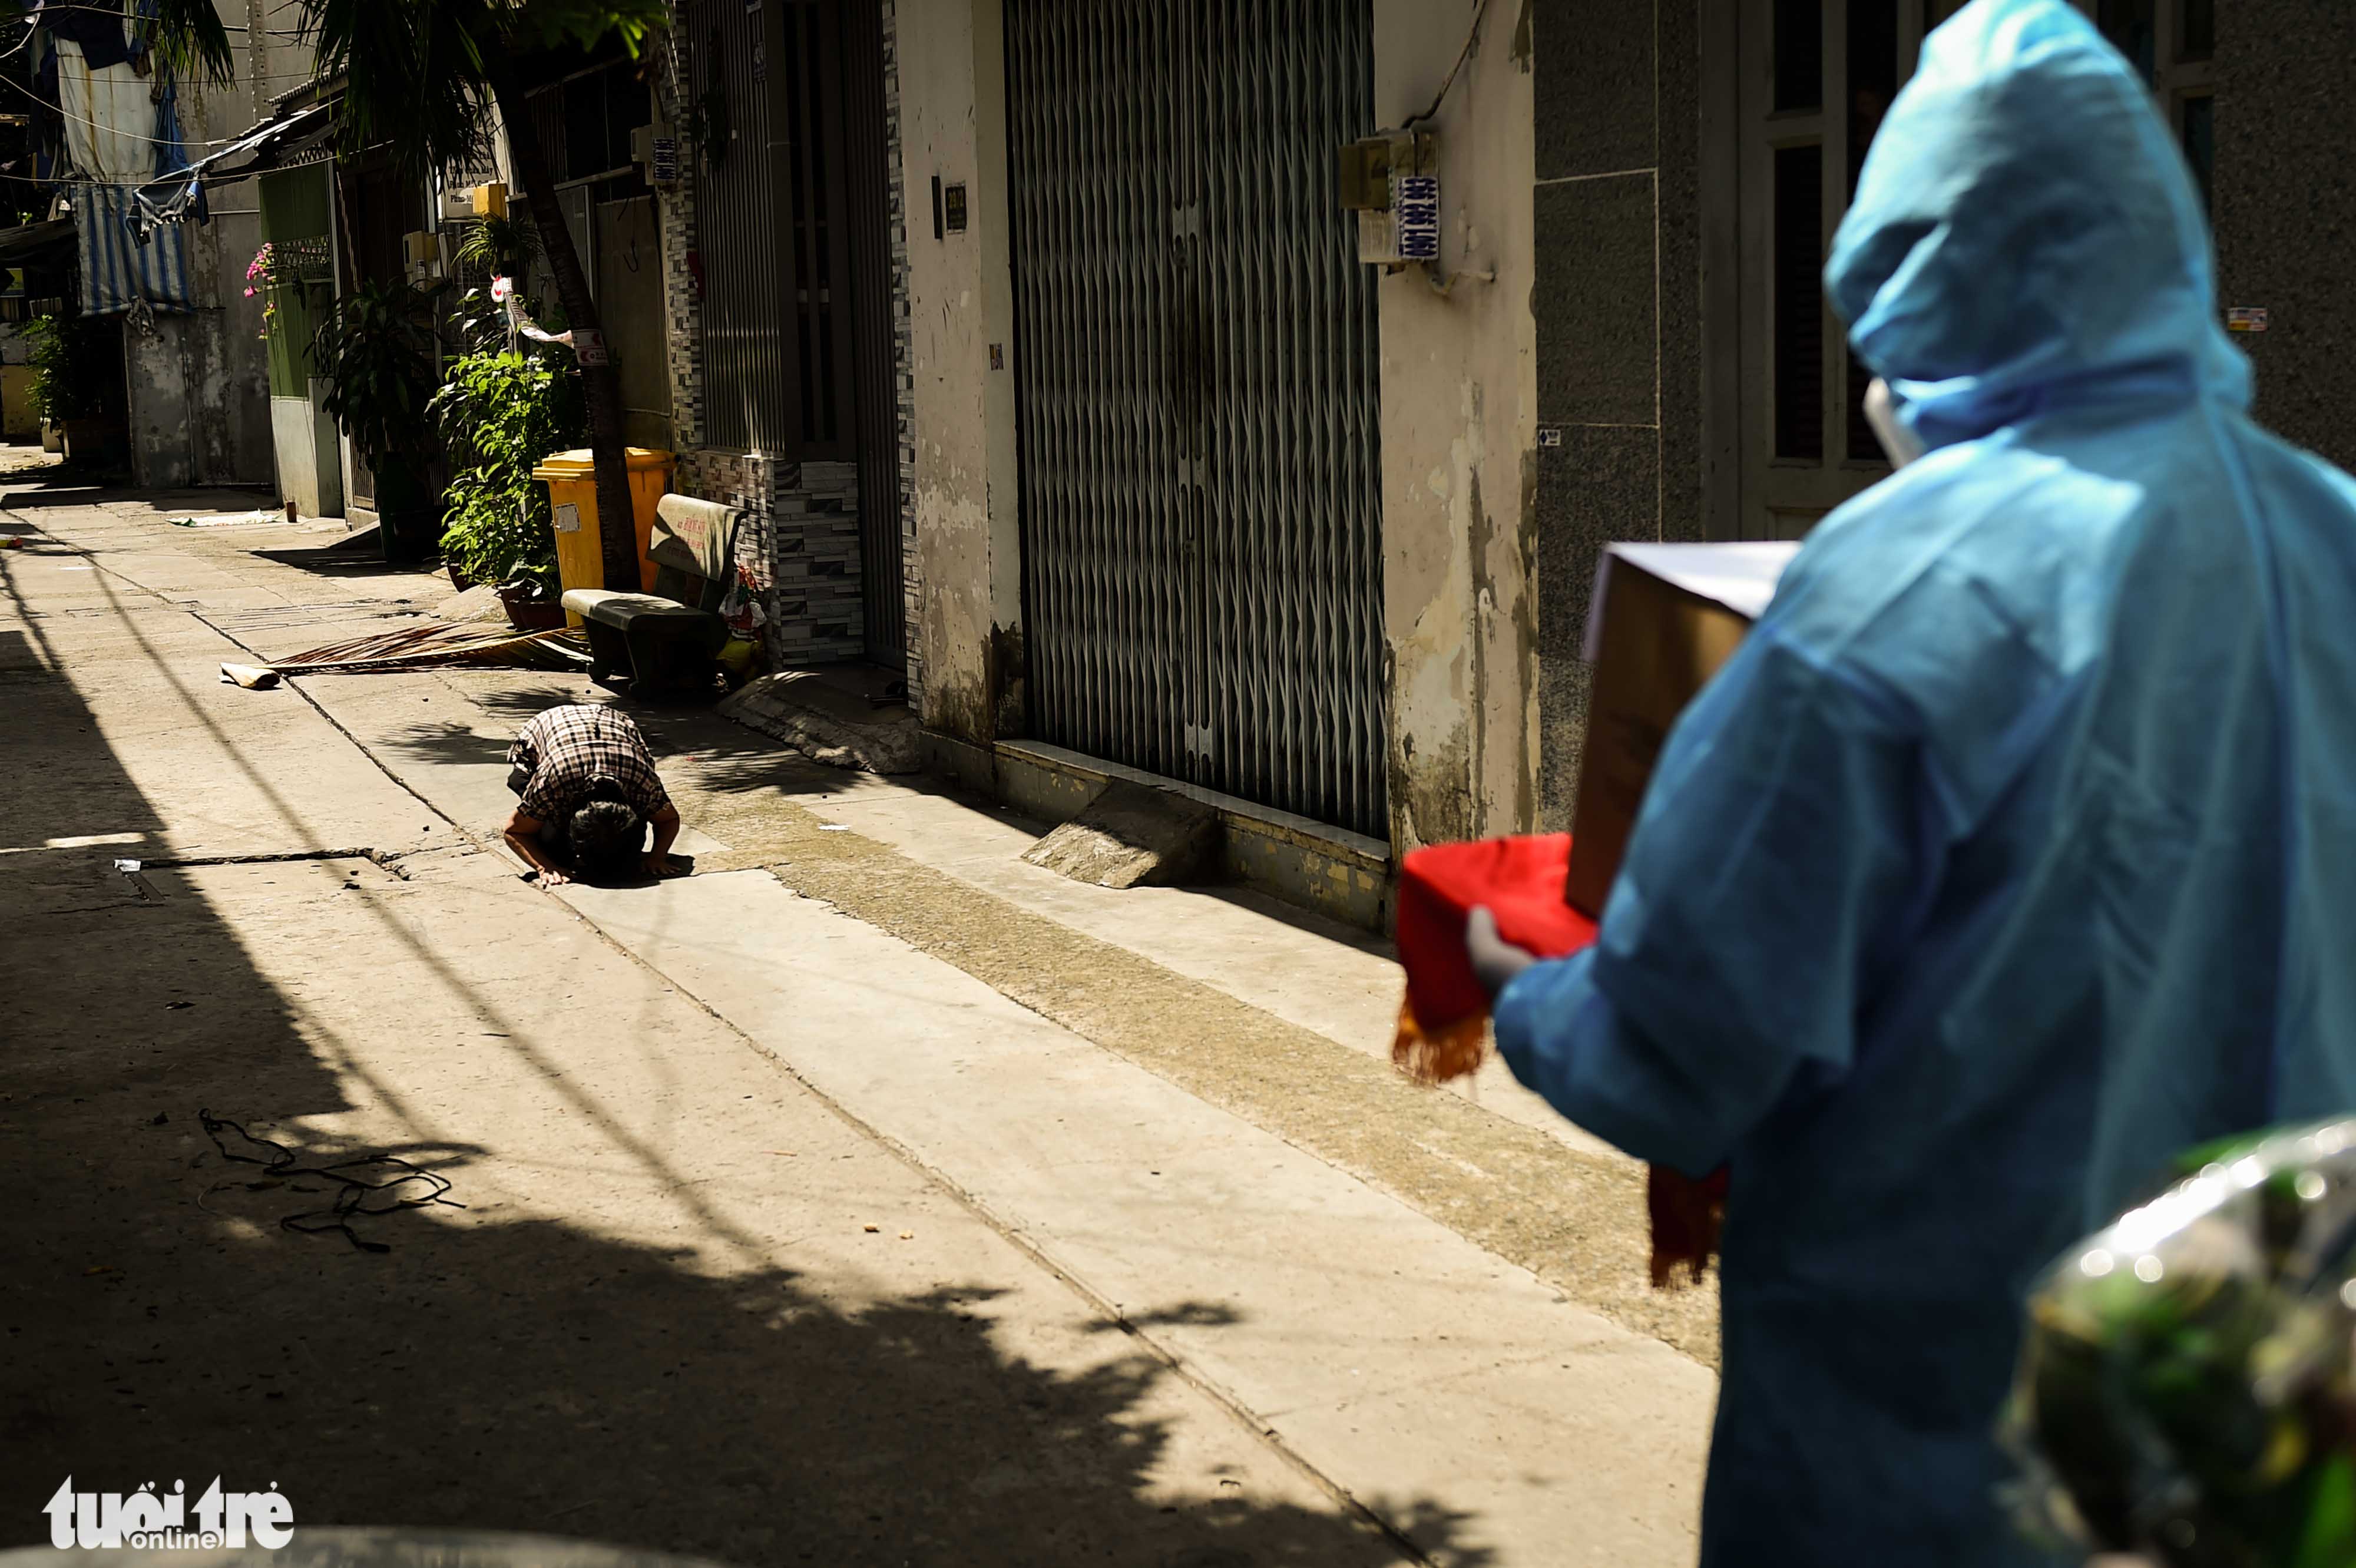 A woman bows in front of the ashes of her mother who died of COVID-19 in Ho Chi Minh City. Deceased COVID-19 patients were cremated at Binh Hung Hoa in Binh Tan District before their ashes were taken to their family members. Photo: Thanh Minh / Tuoi Tre